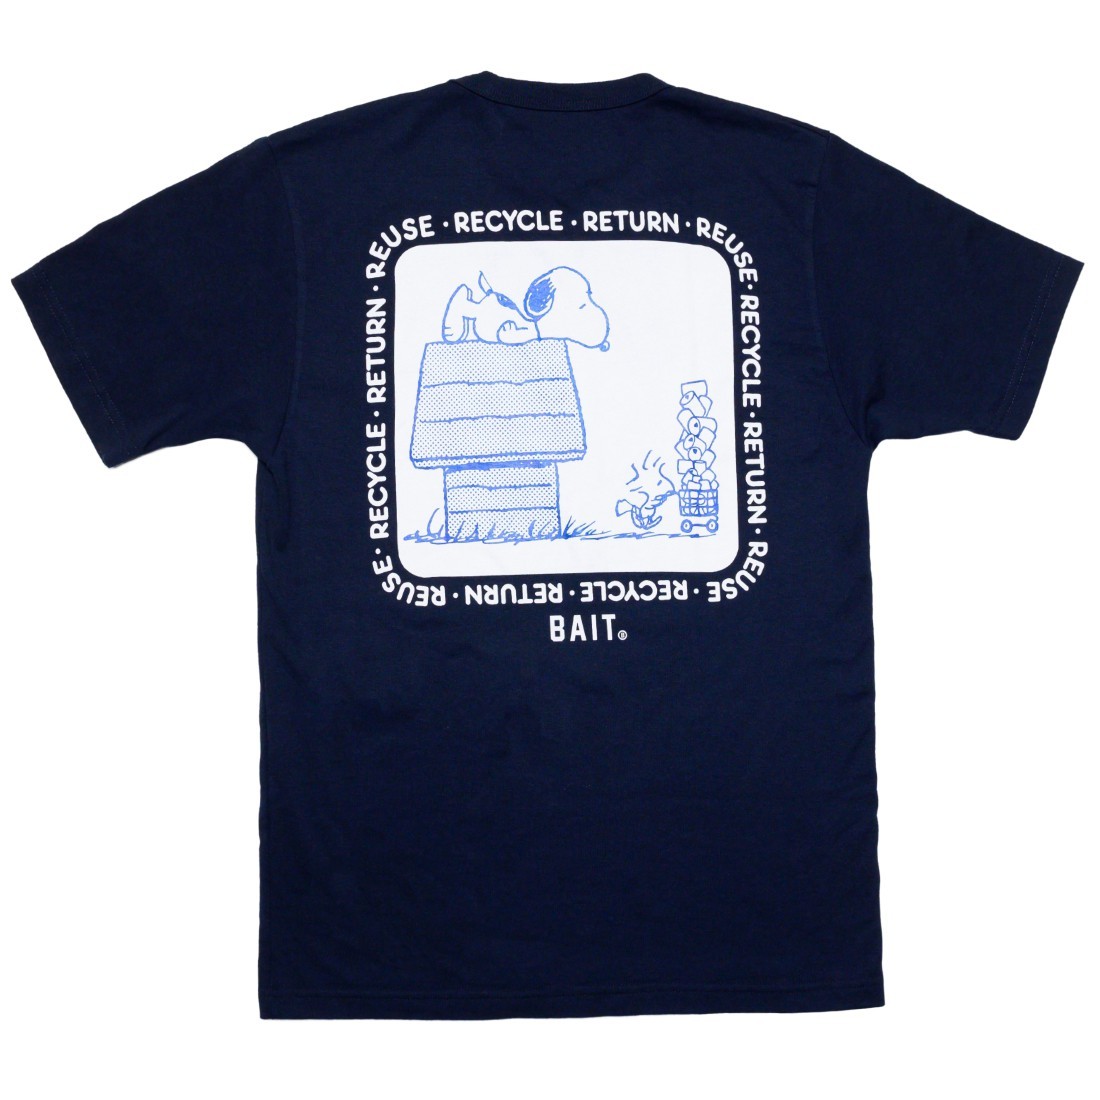 BAIT x Snoopy x Upcycle Men Recycle Tee (blue / stone)